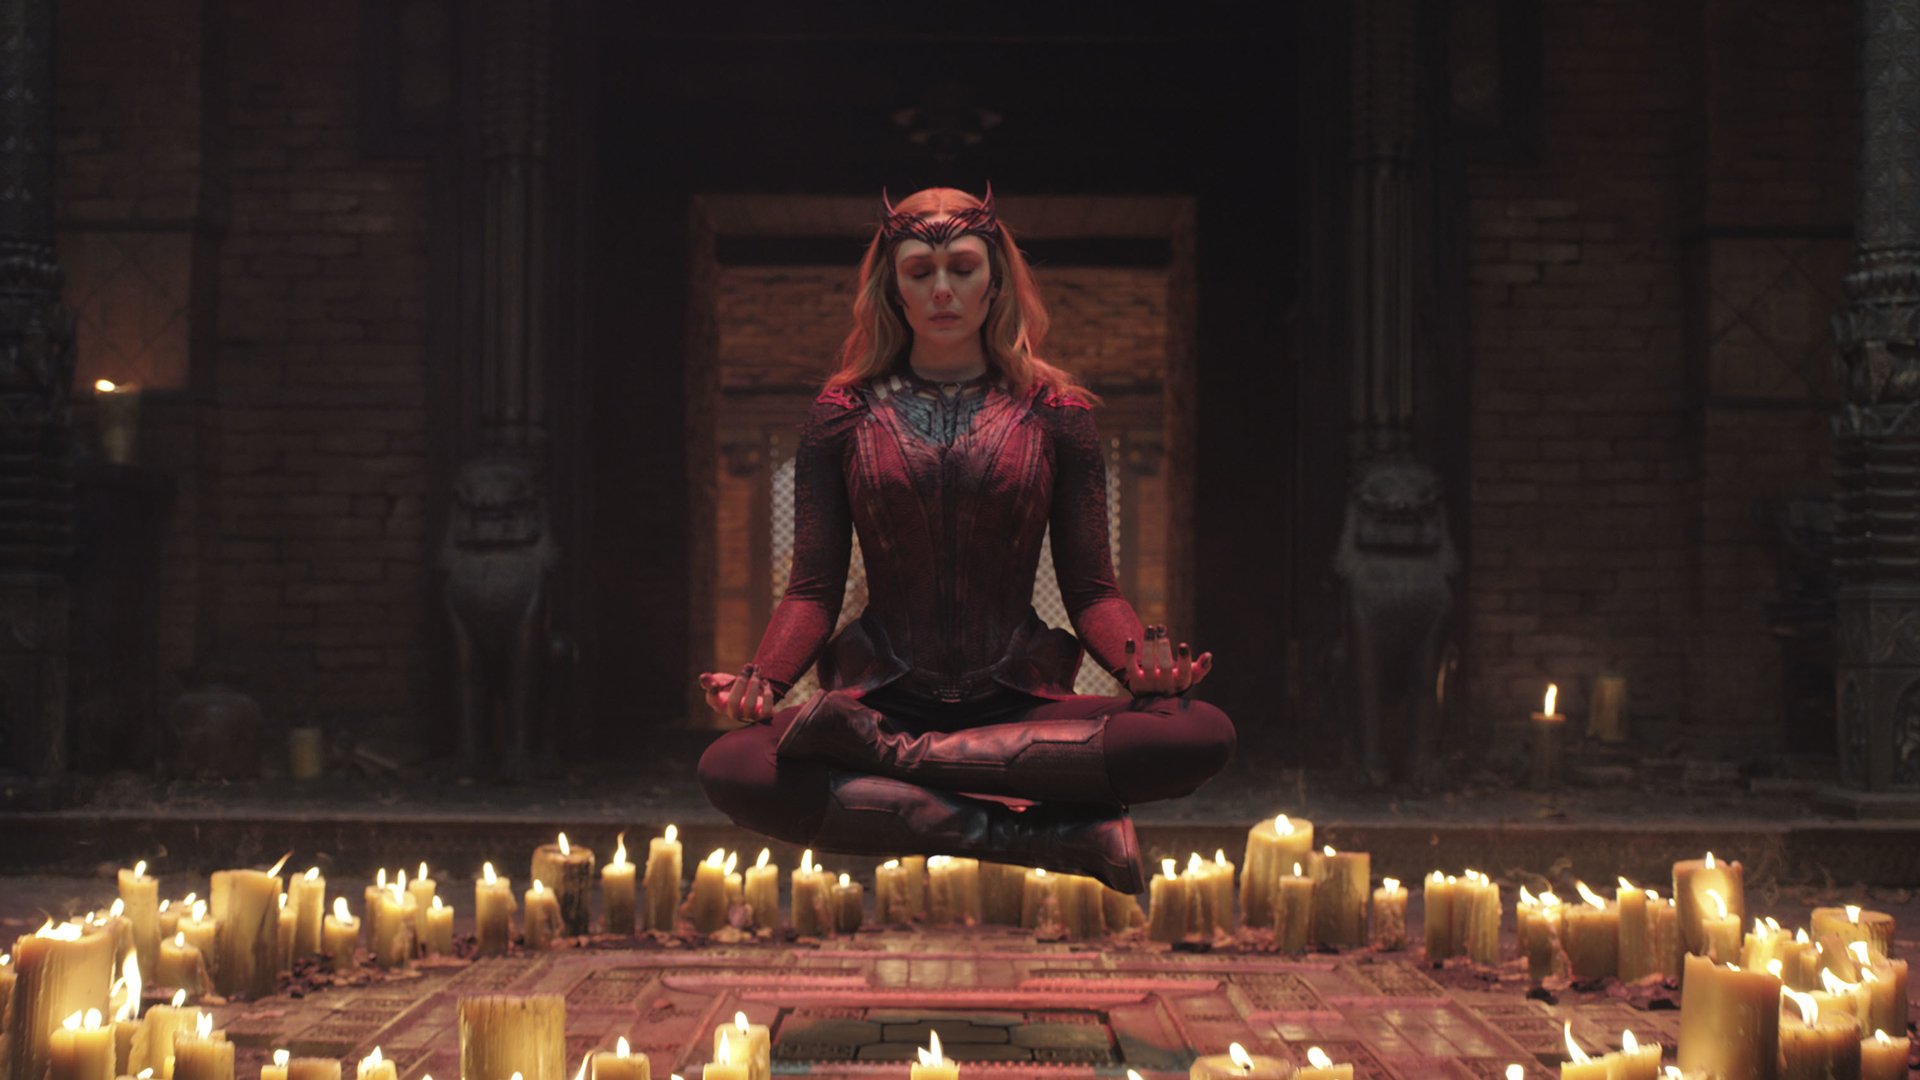 A woman dressed as a superhero levitates while meditating in a circle of candles.